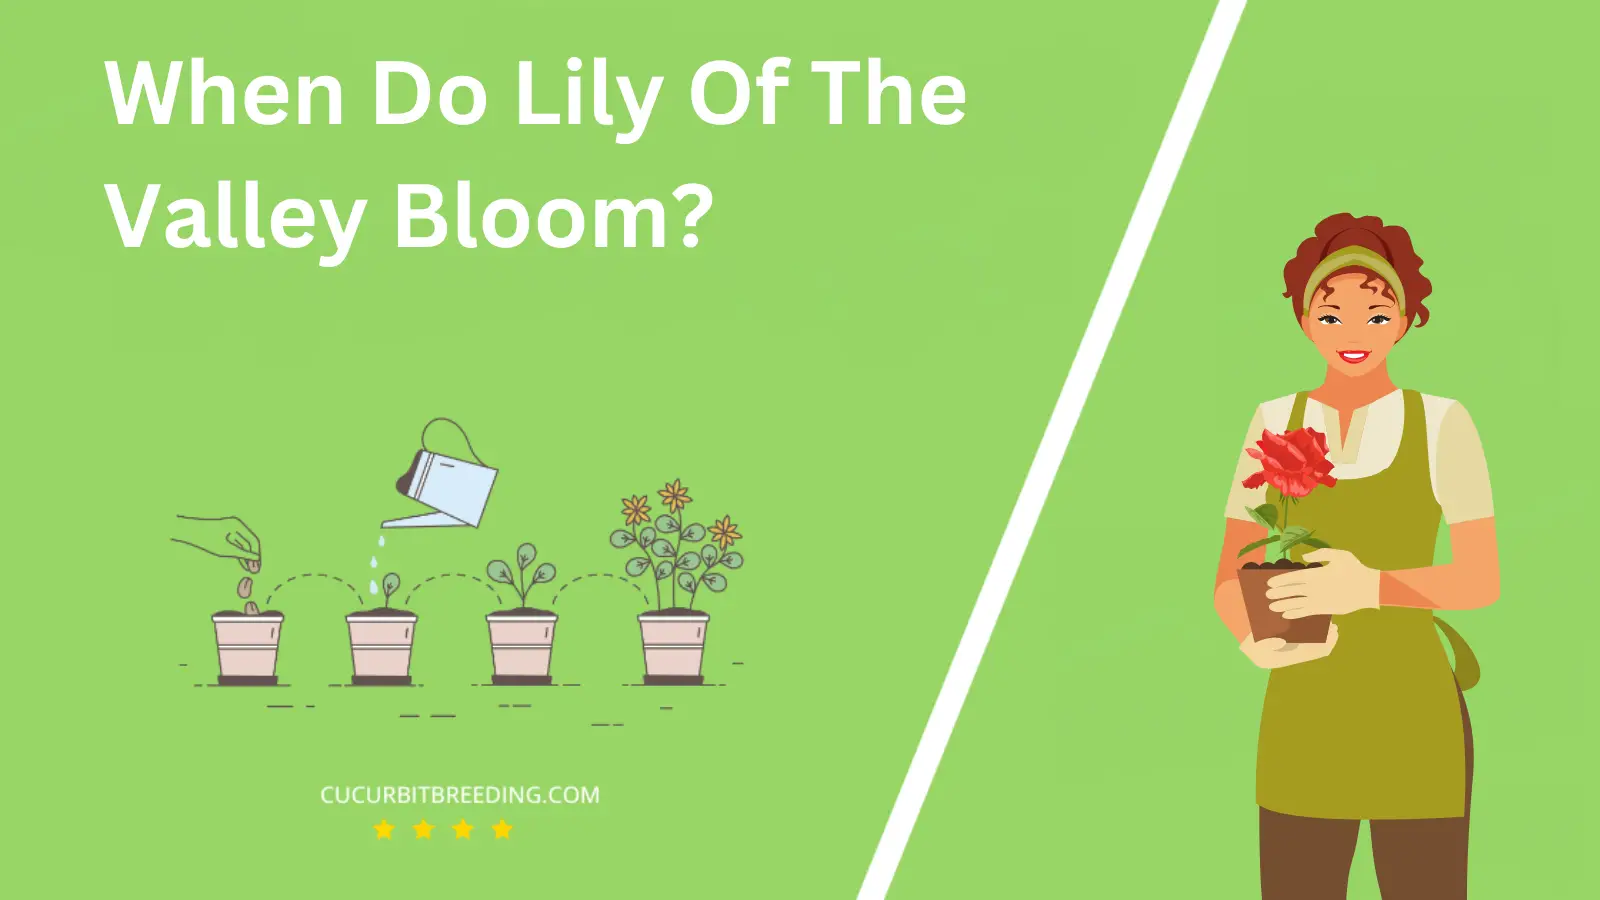 When Do Lily Of The Valley Bloom?